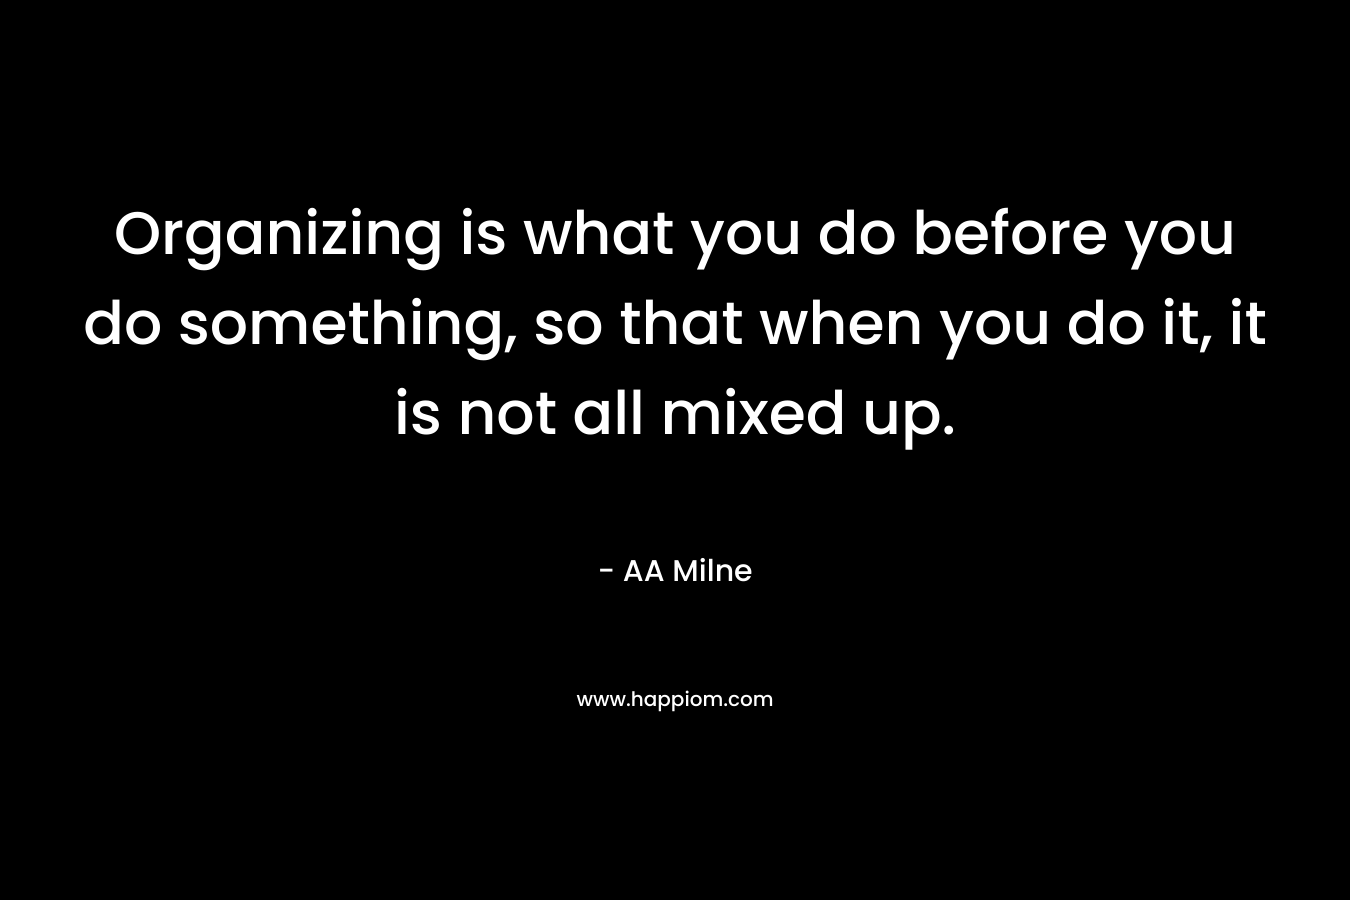 Organizing is what you do before you do something, so that when you do it, it is not all mixed up. – AA Milne